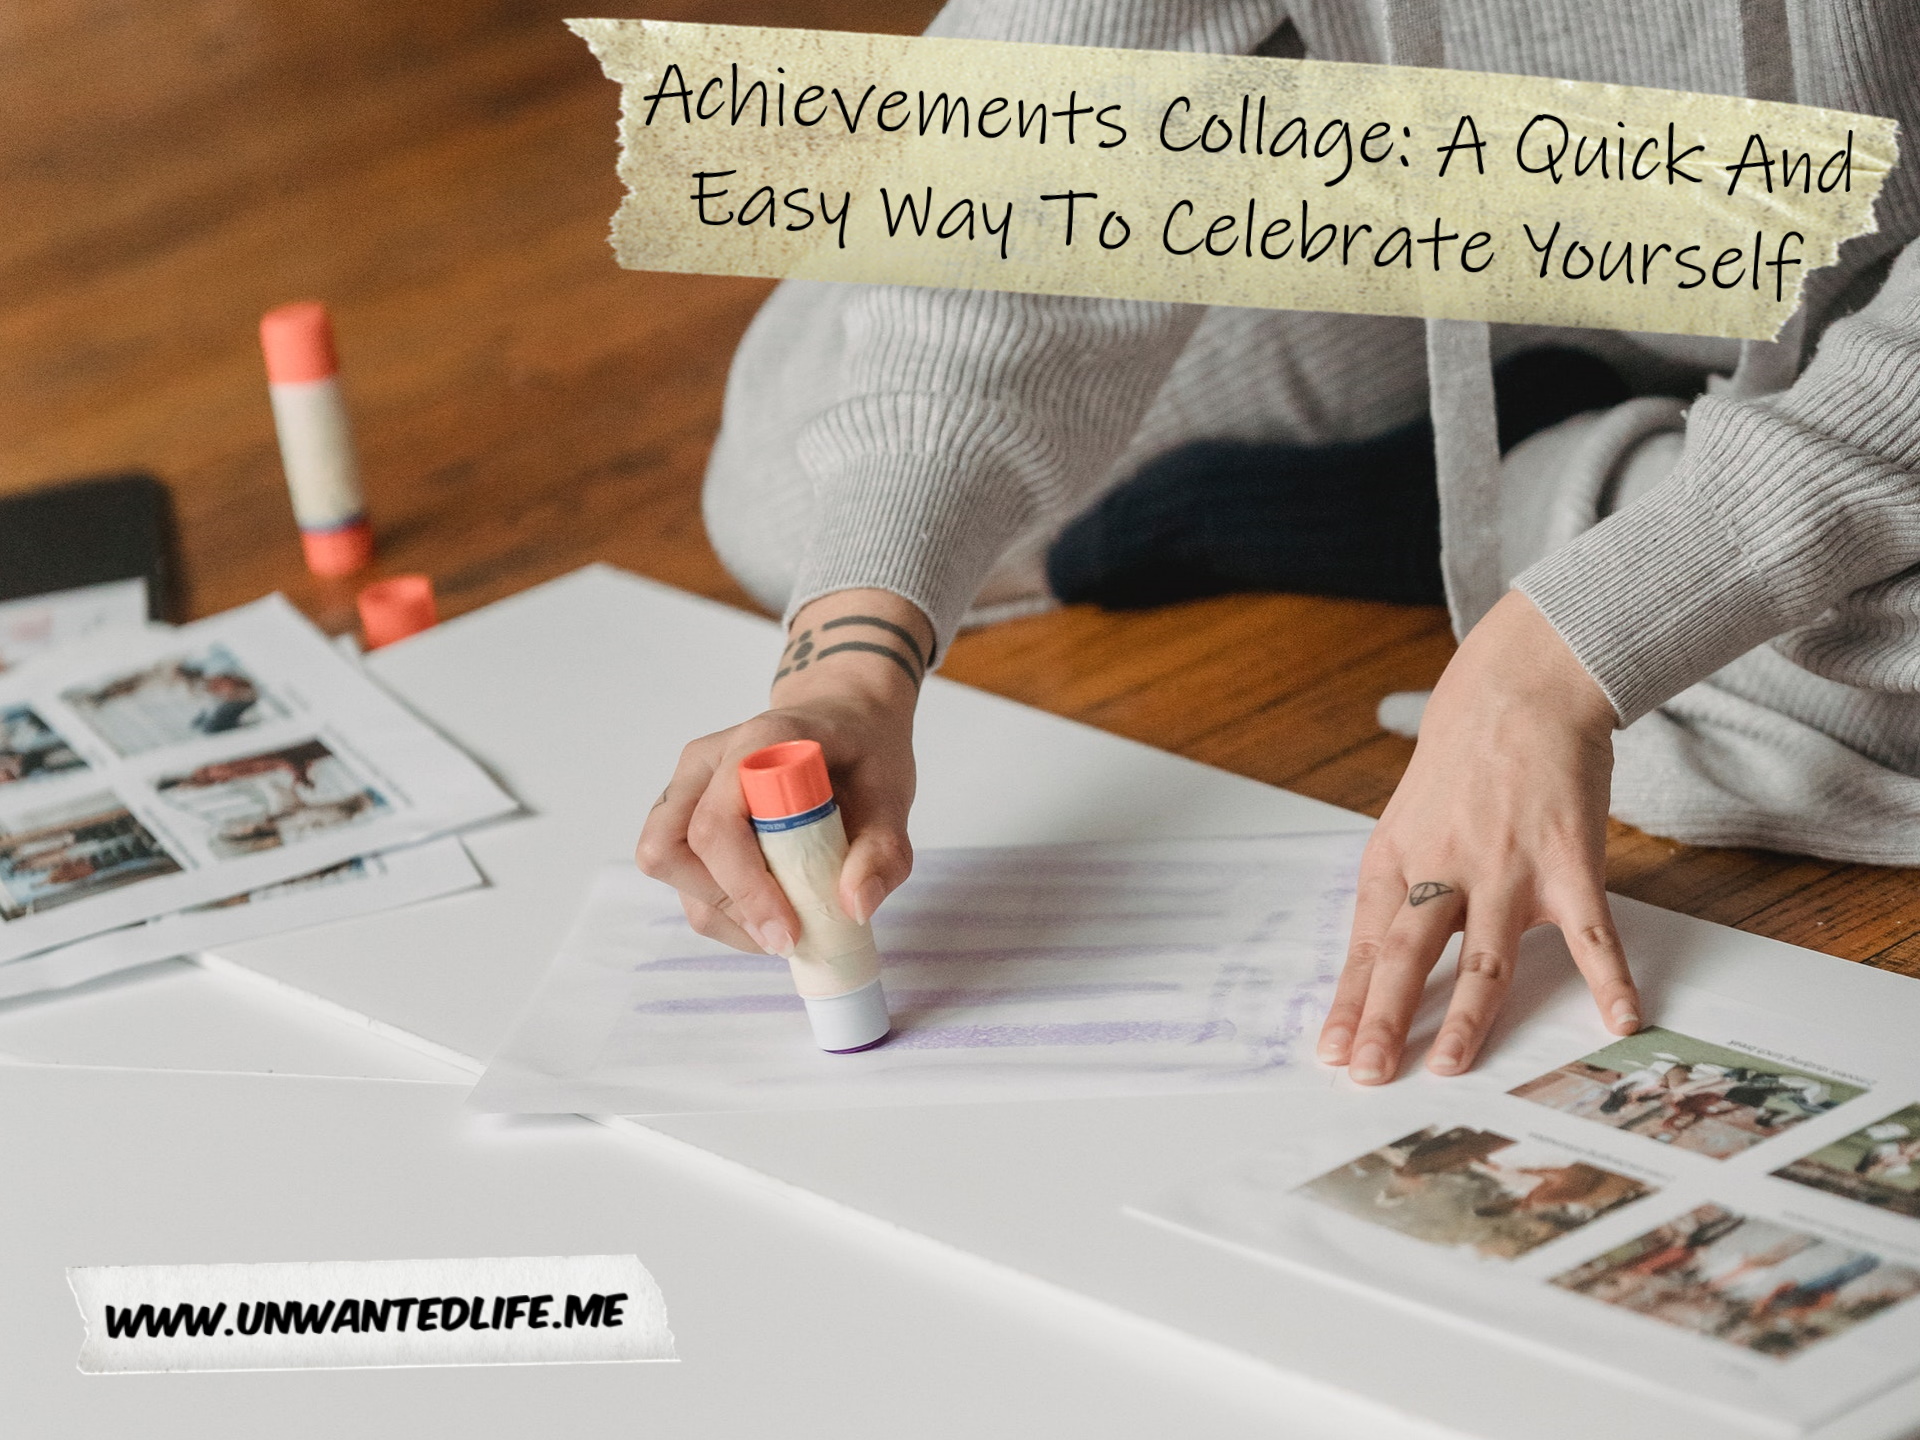 A photo of a white woman gluing pictures to whiteboard to represent the topic of the article - Achievements Collage A Quick And Easy Way To Celebrate Yourself